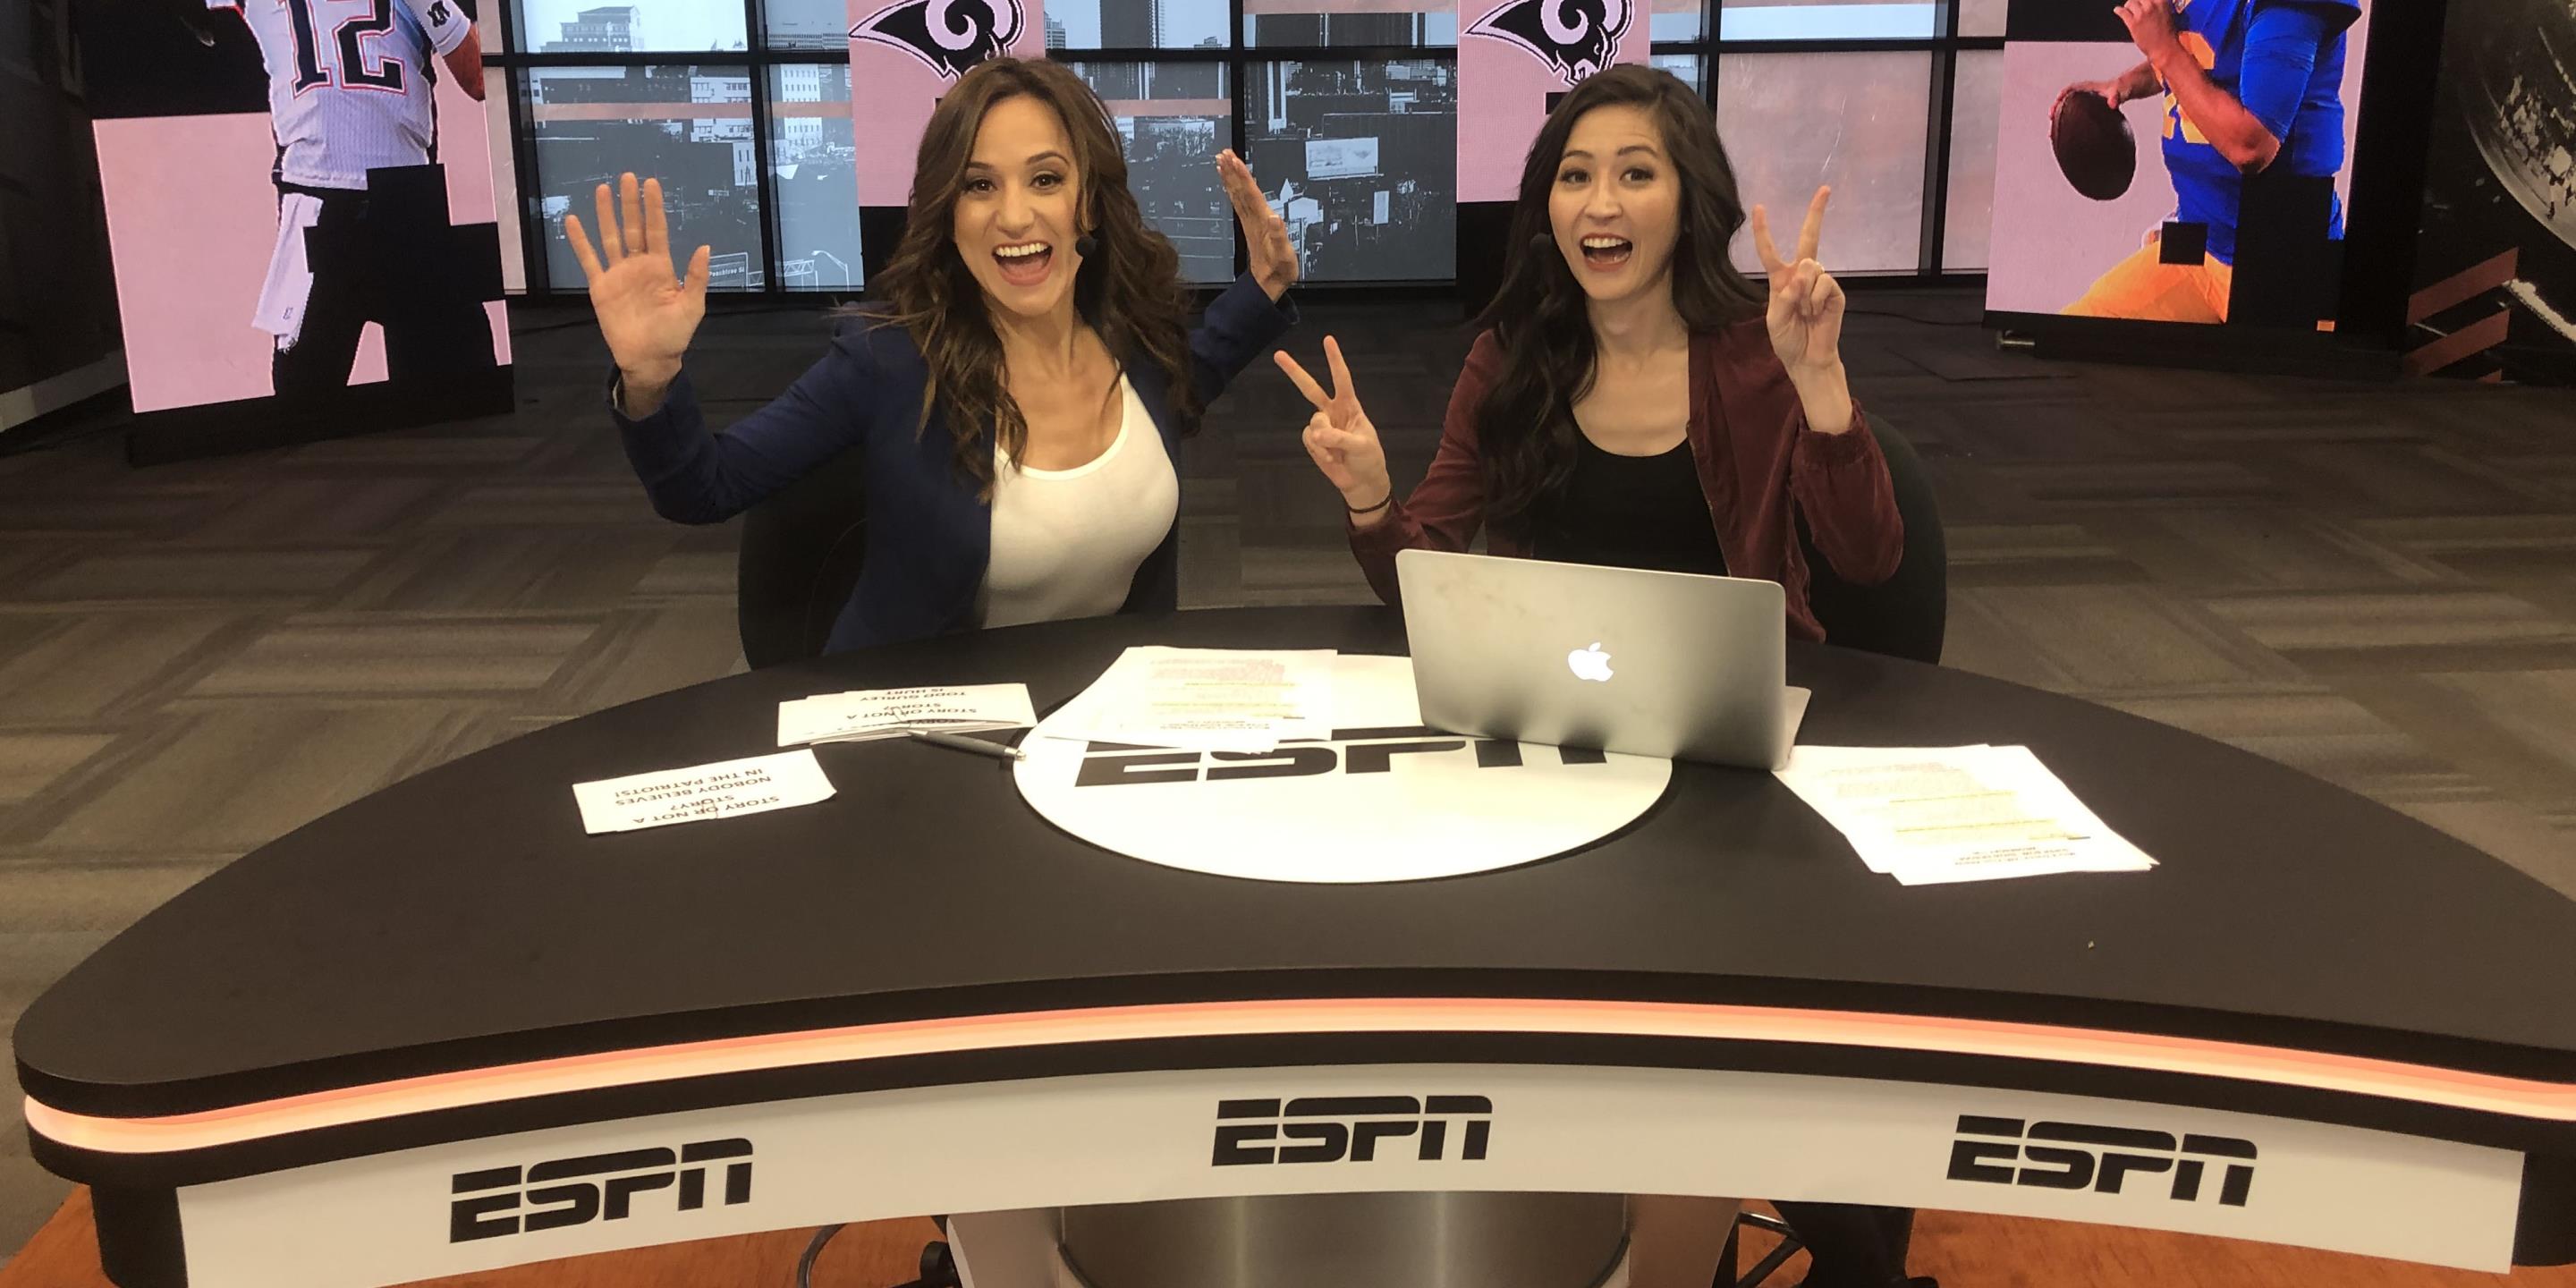 The millennial voices of ESPN - Furthermore